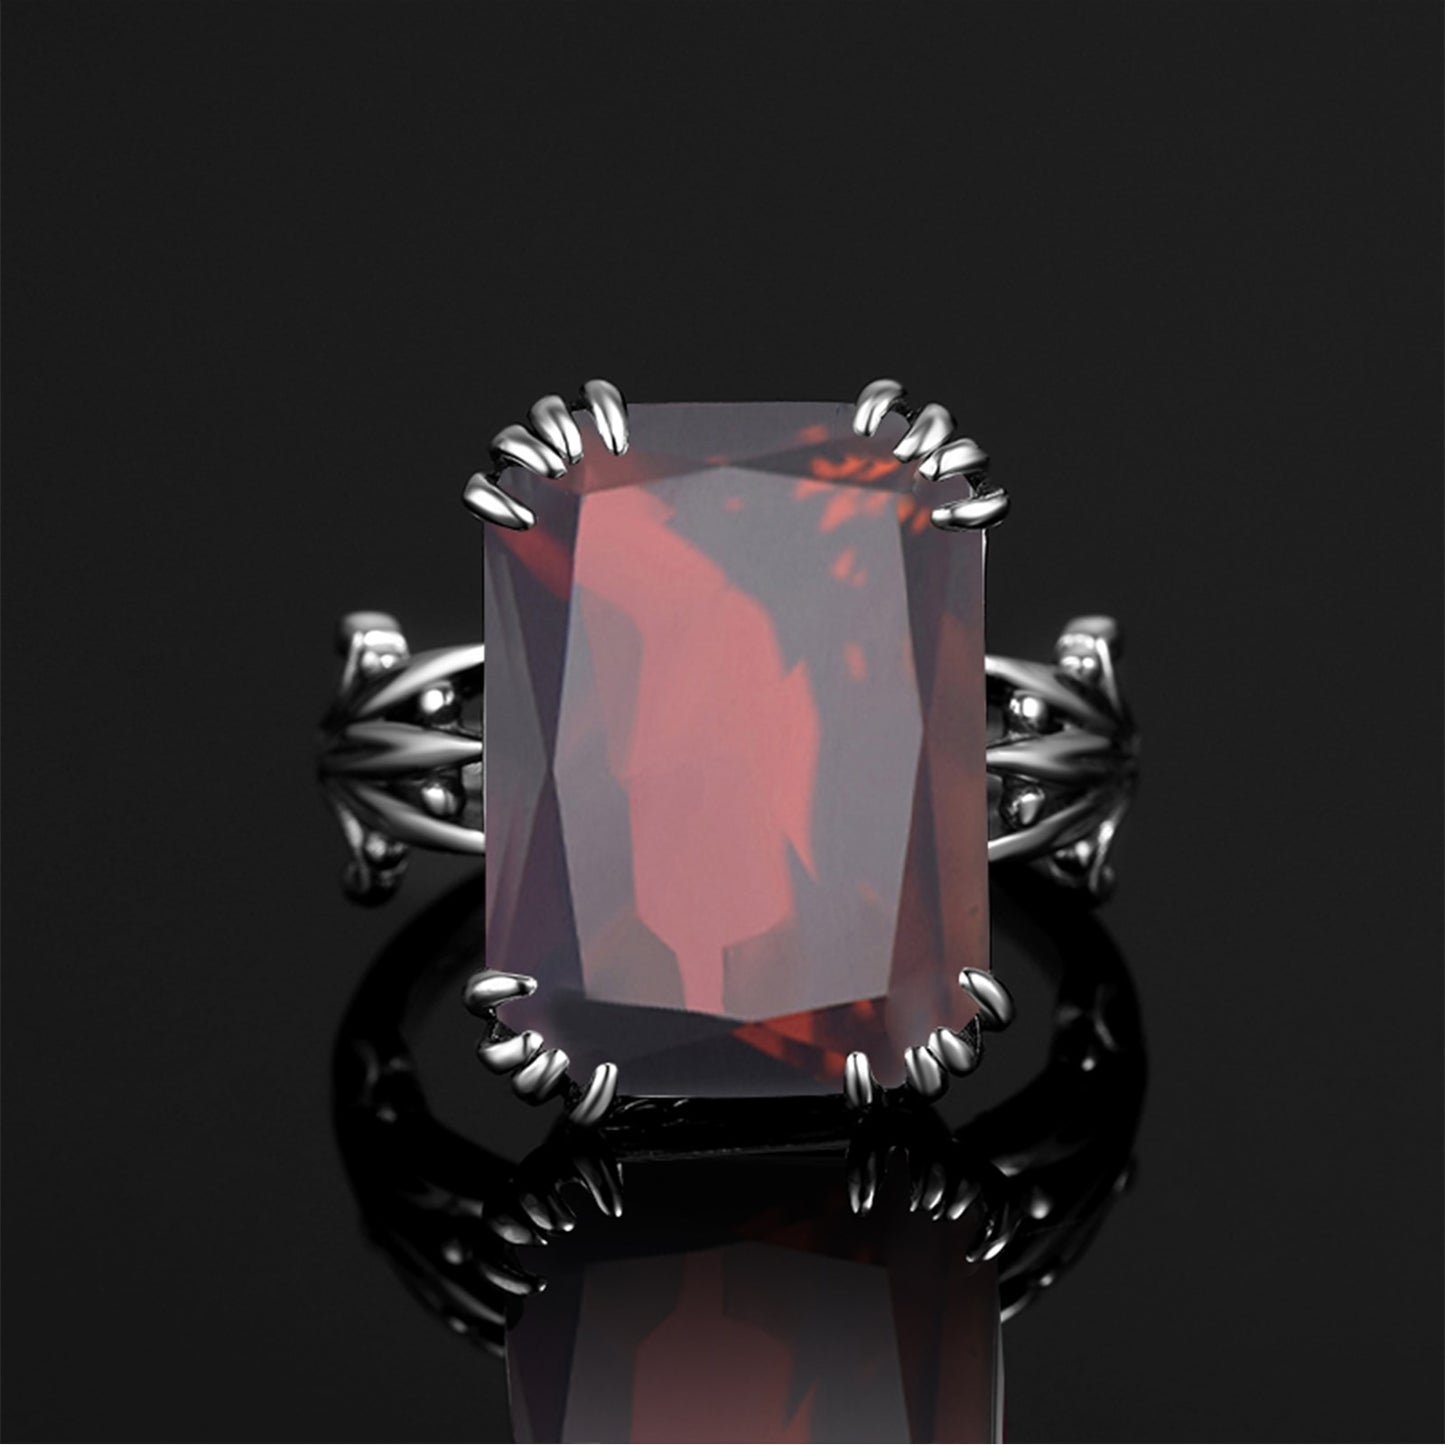 Szjinao High Quality 925 Sterling Silver Rings For Woman Garnet Gemstone Rectangle Party Banquet Elegant Trend Fine Jewelry